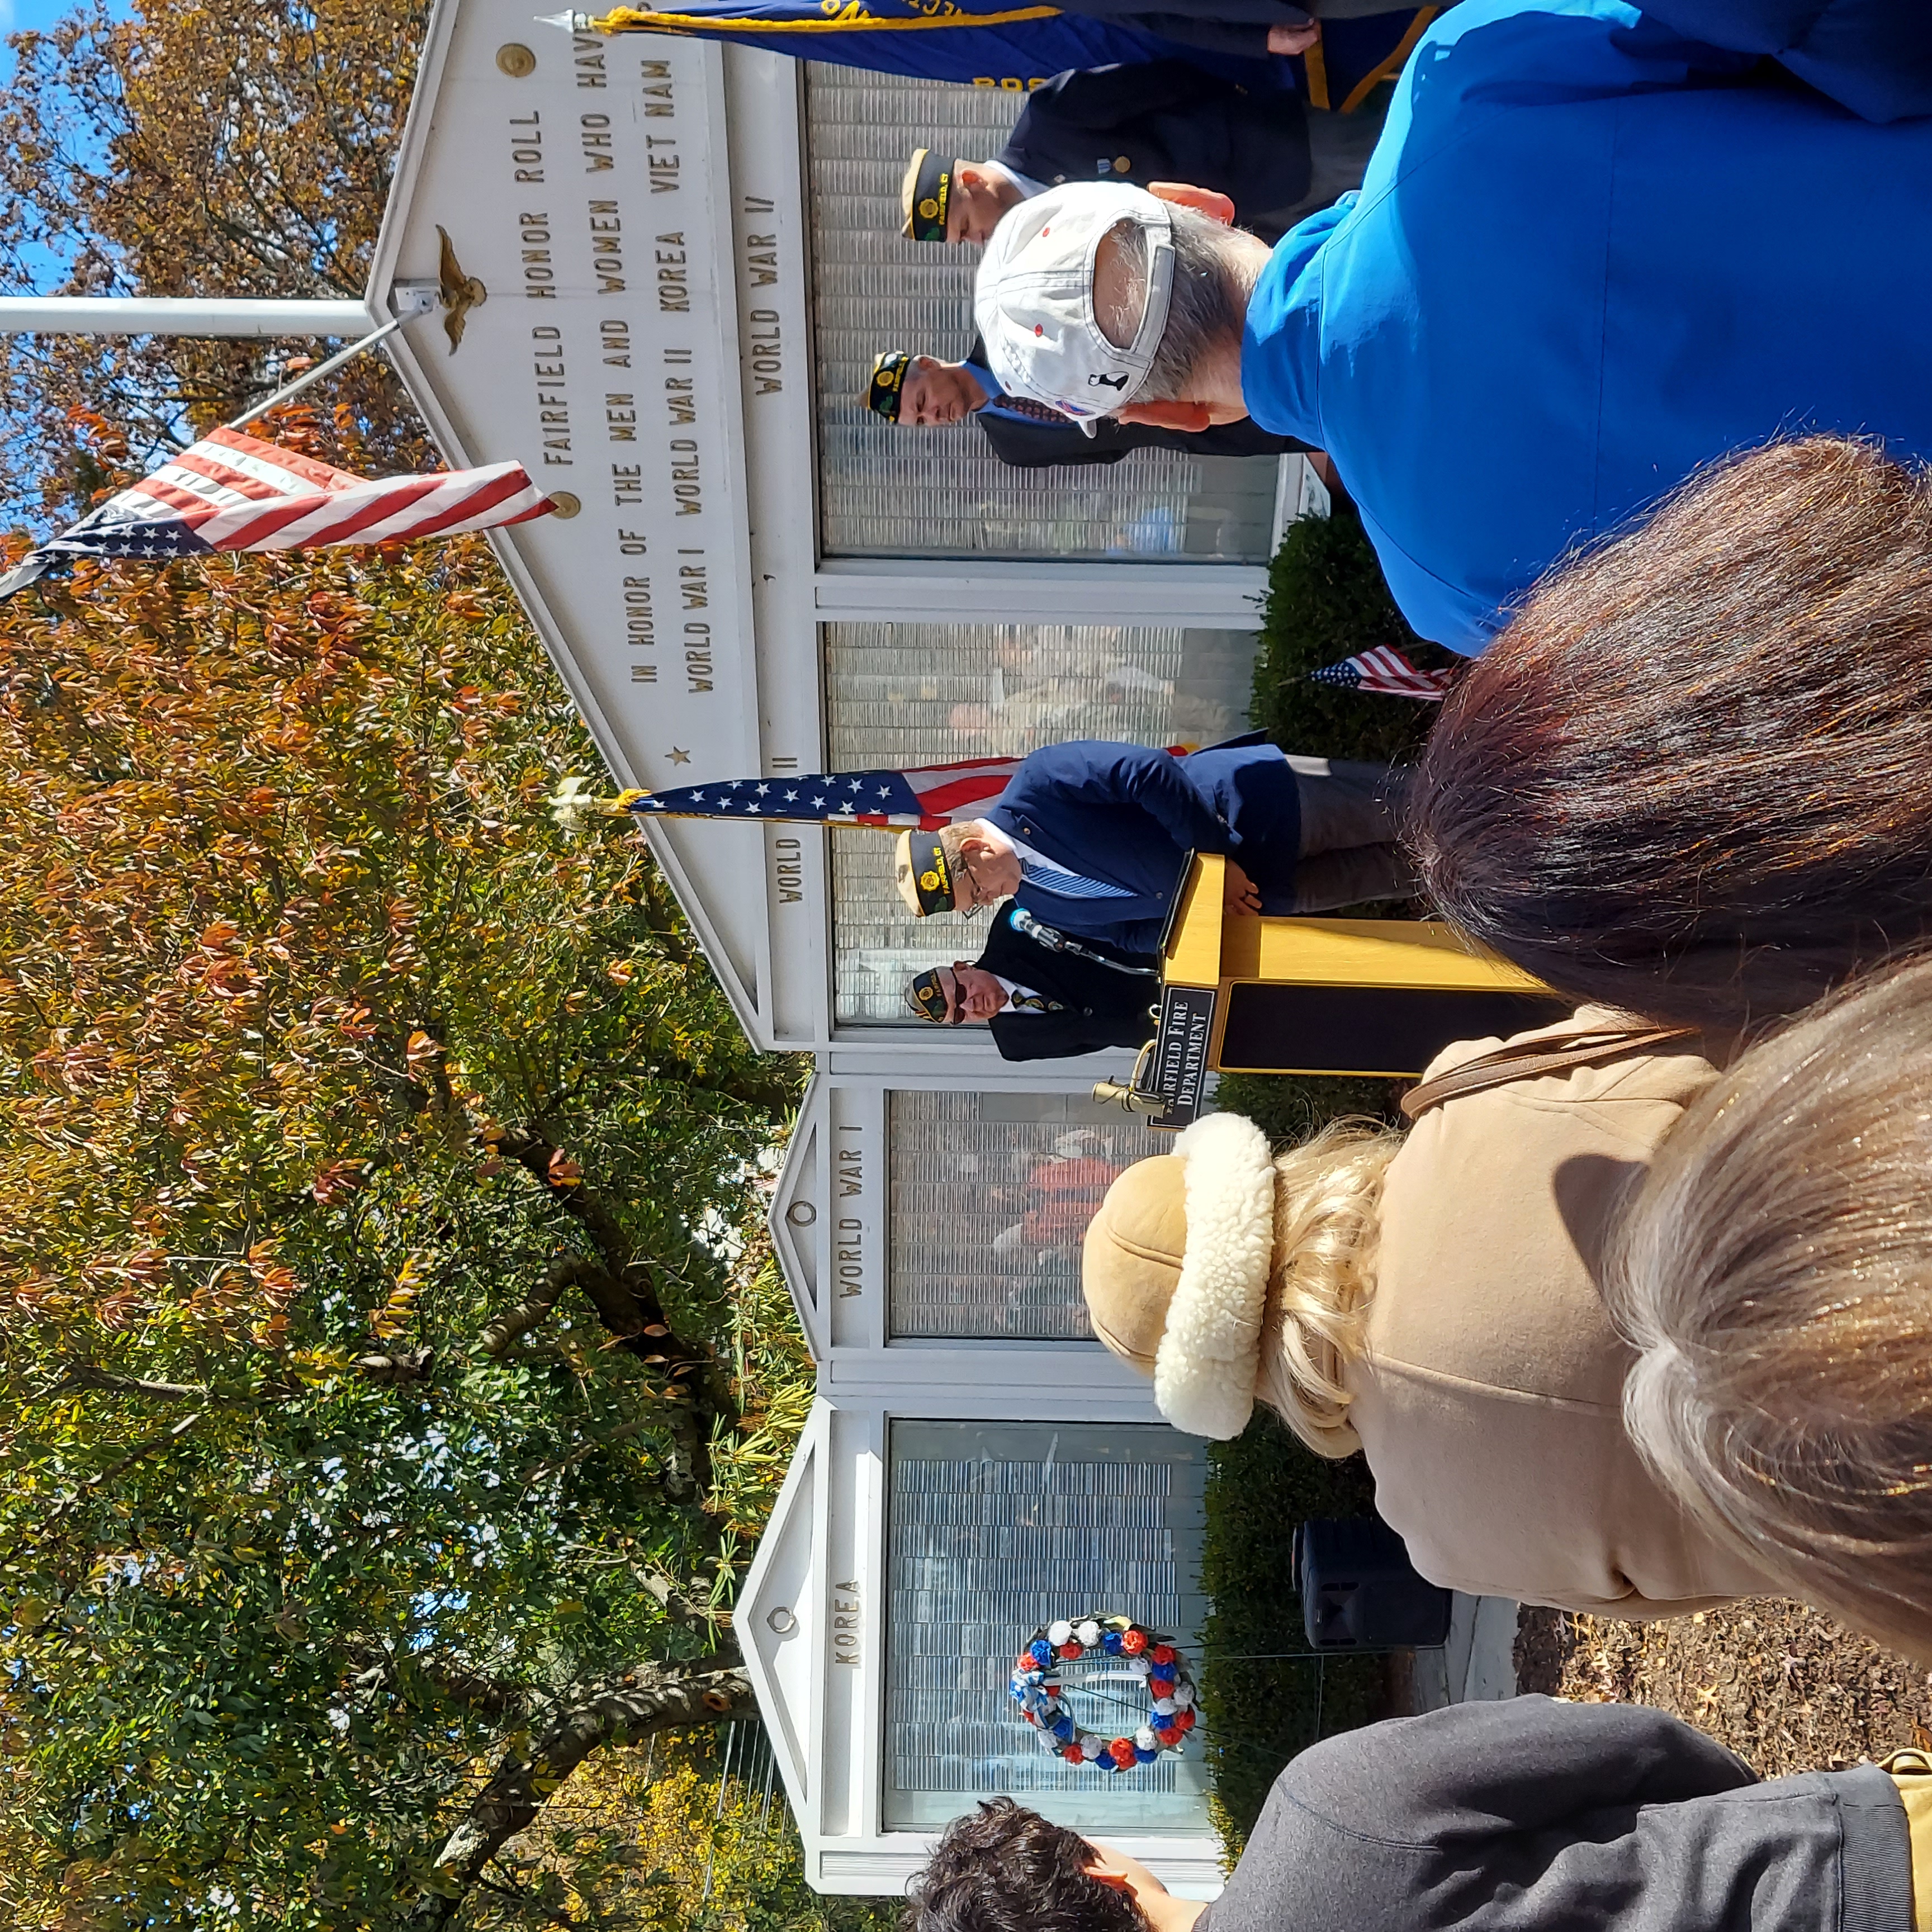 Honoring Our Veterans: The Annual Fairfield Veterans Day Ceremony